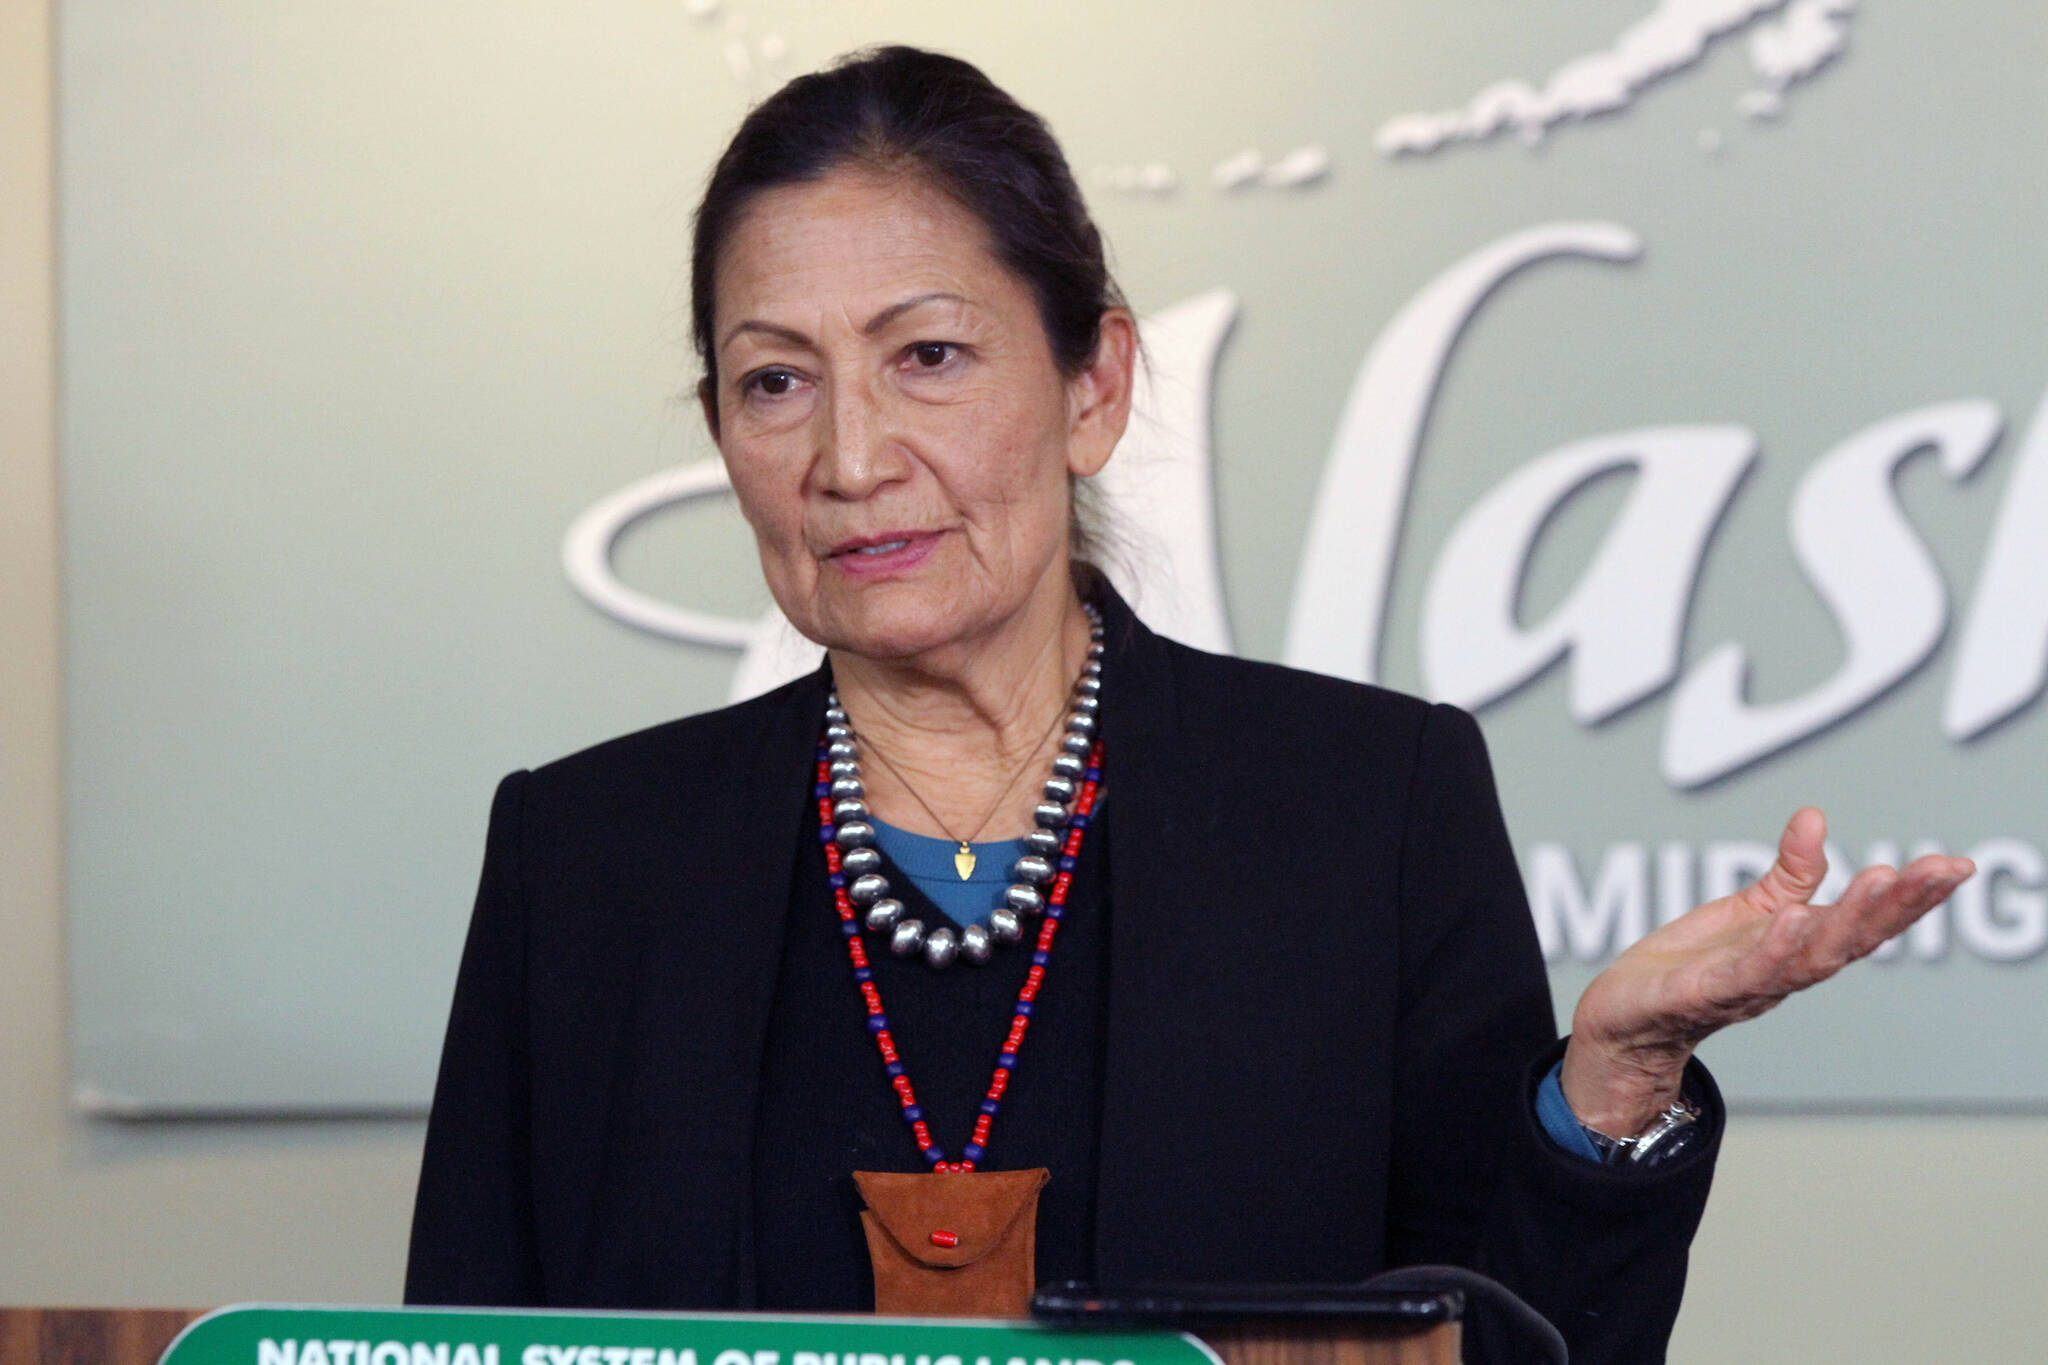 Interior Secretary Deb Haaland gestures while addressing reporters during a news conference Thursday, in Anchorage. Haaland is in the midst of a visit to the state that included a trip to King Cove, a community at the center of a long-running dispute over a proposed land exchange aimed at building a road through a national wildlife refuge. (AP Photo/Mark Thiessen)